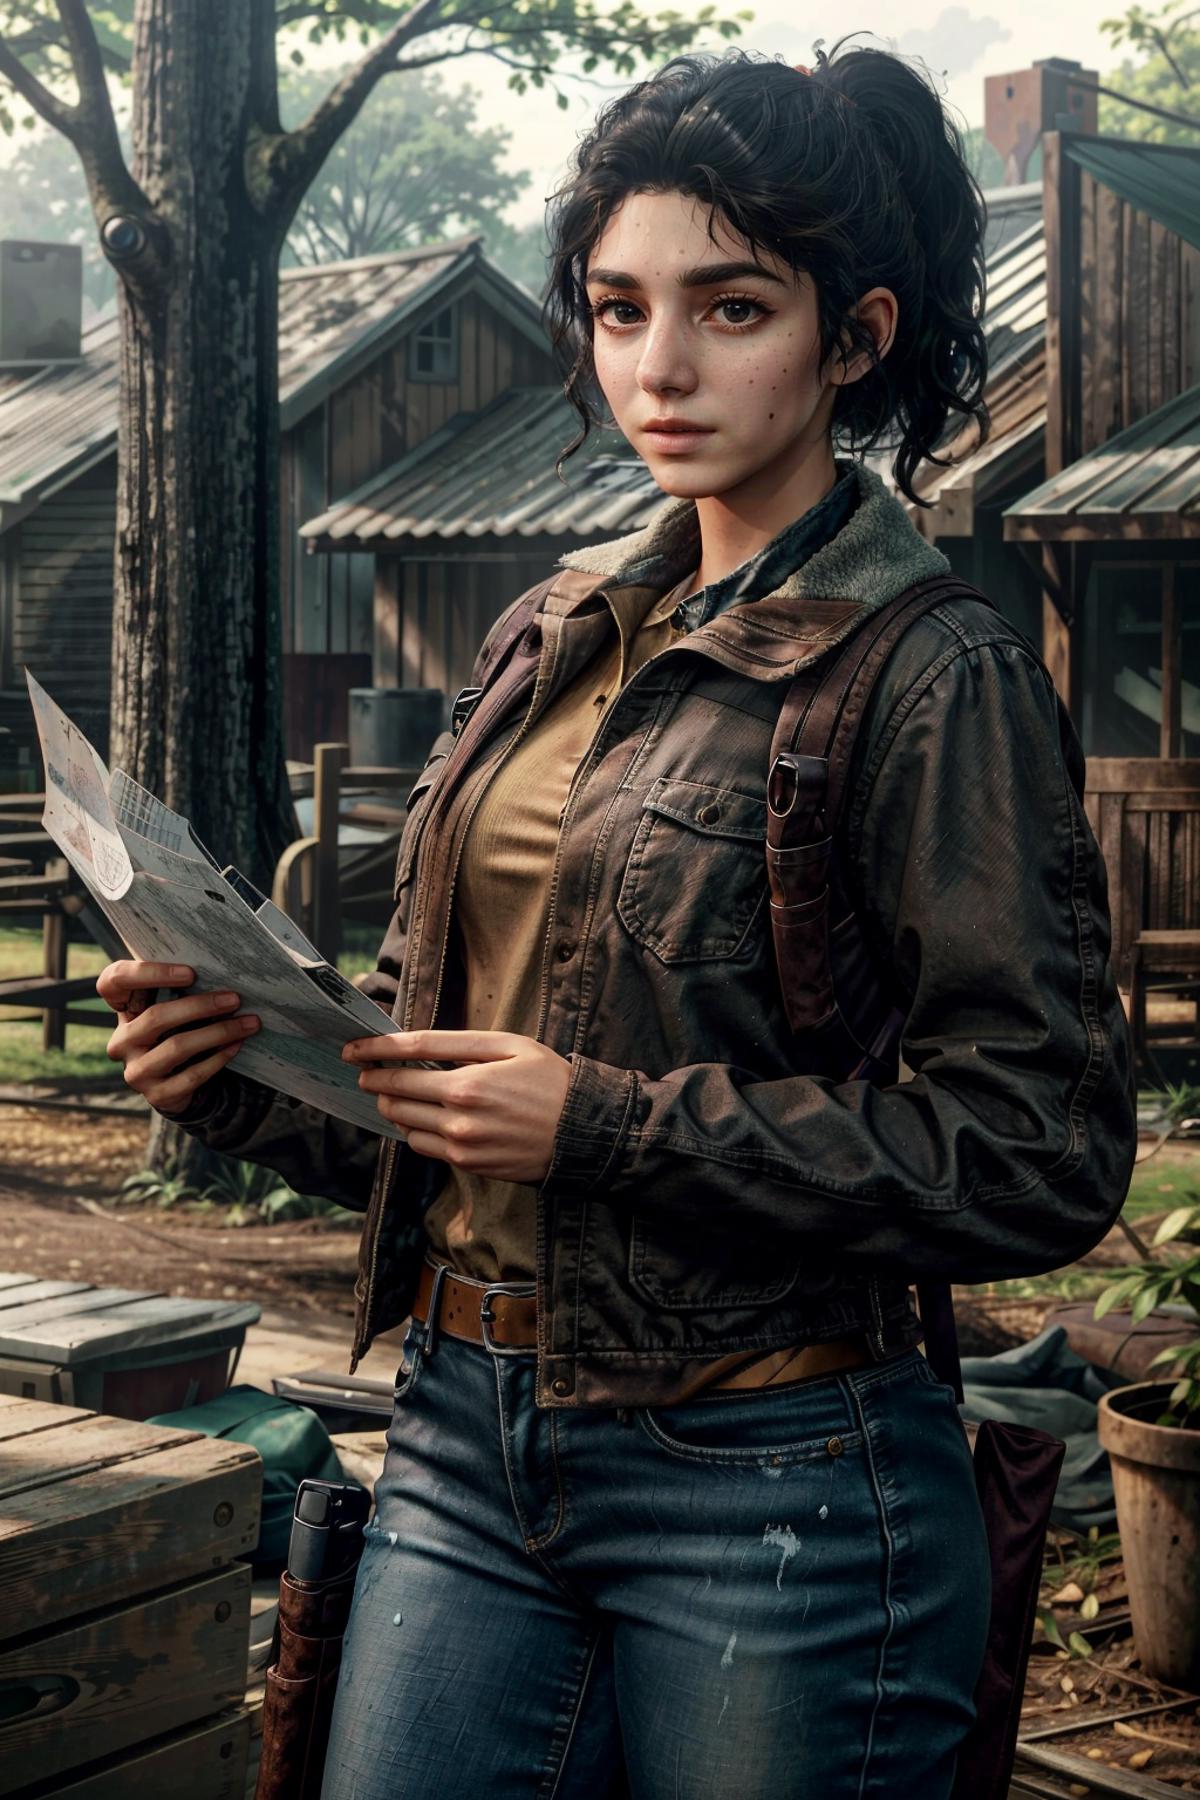 Dina from The Last of Us 2 image by BloodRedKittie